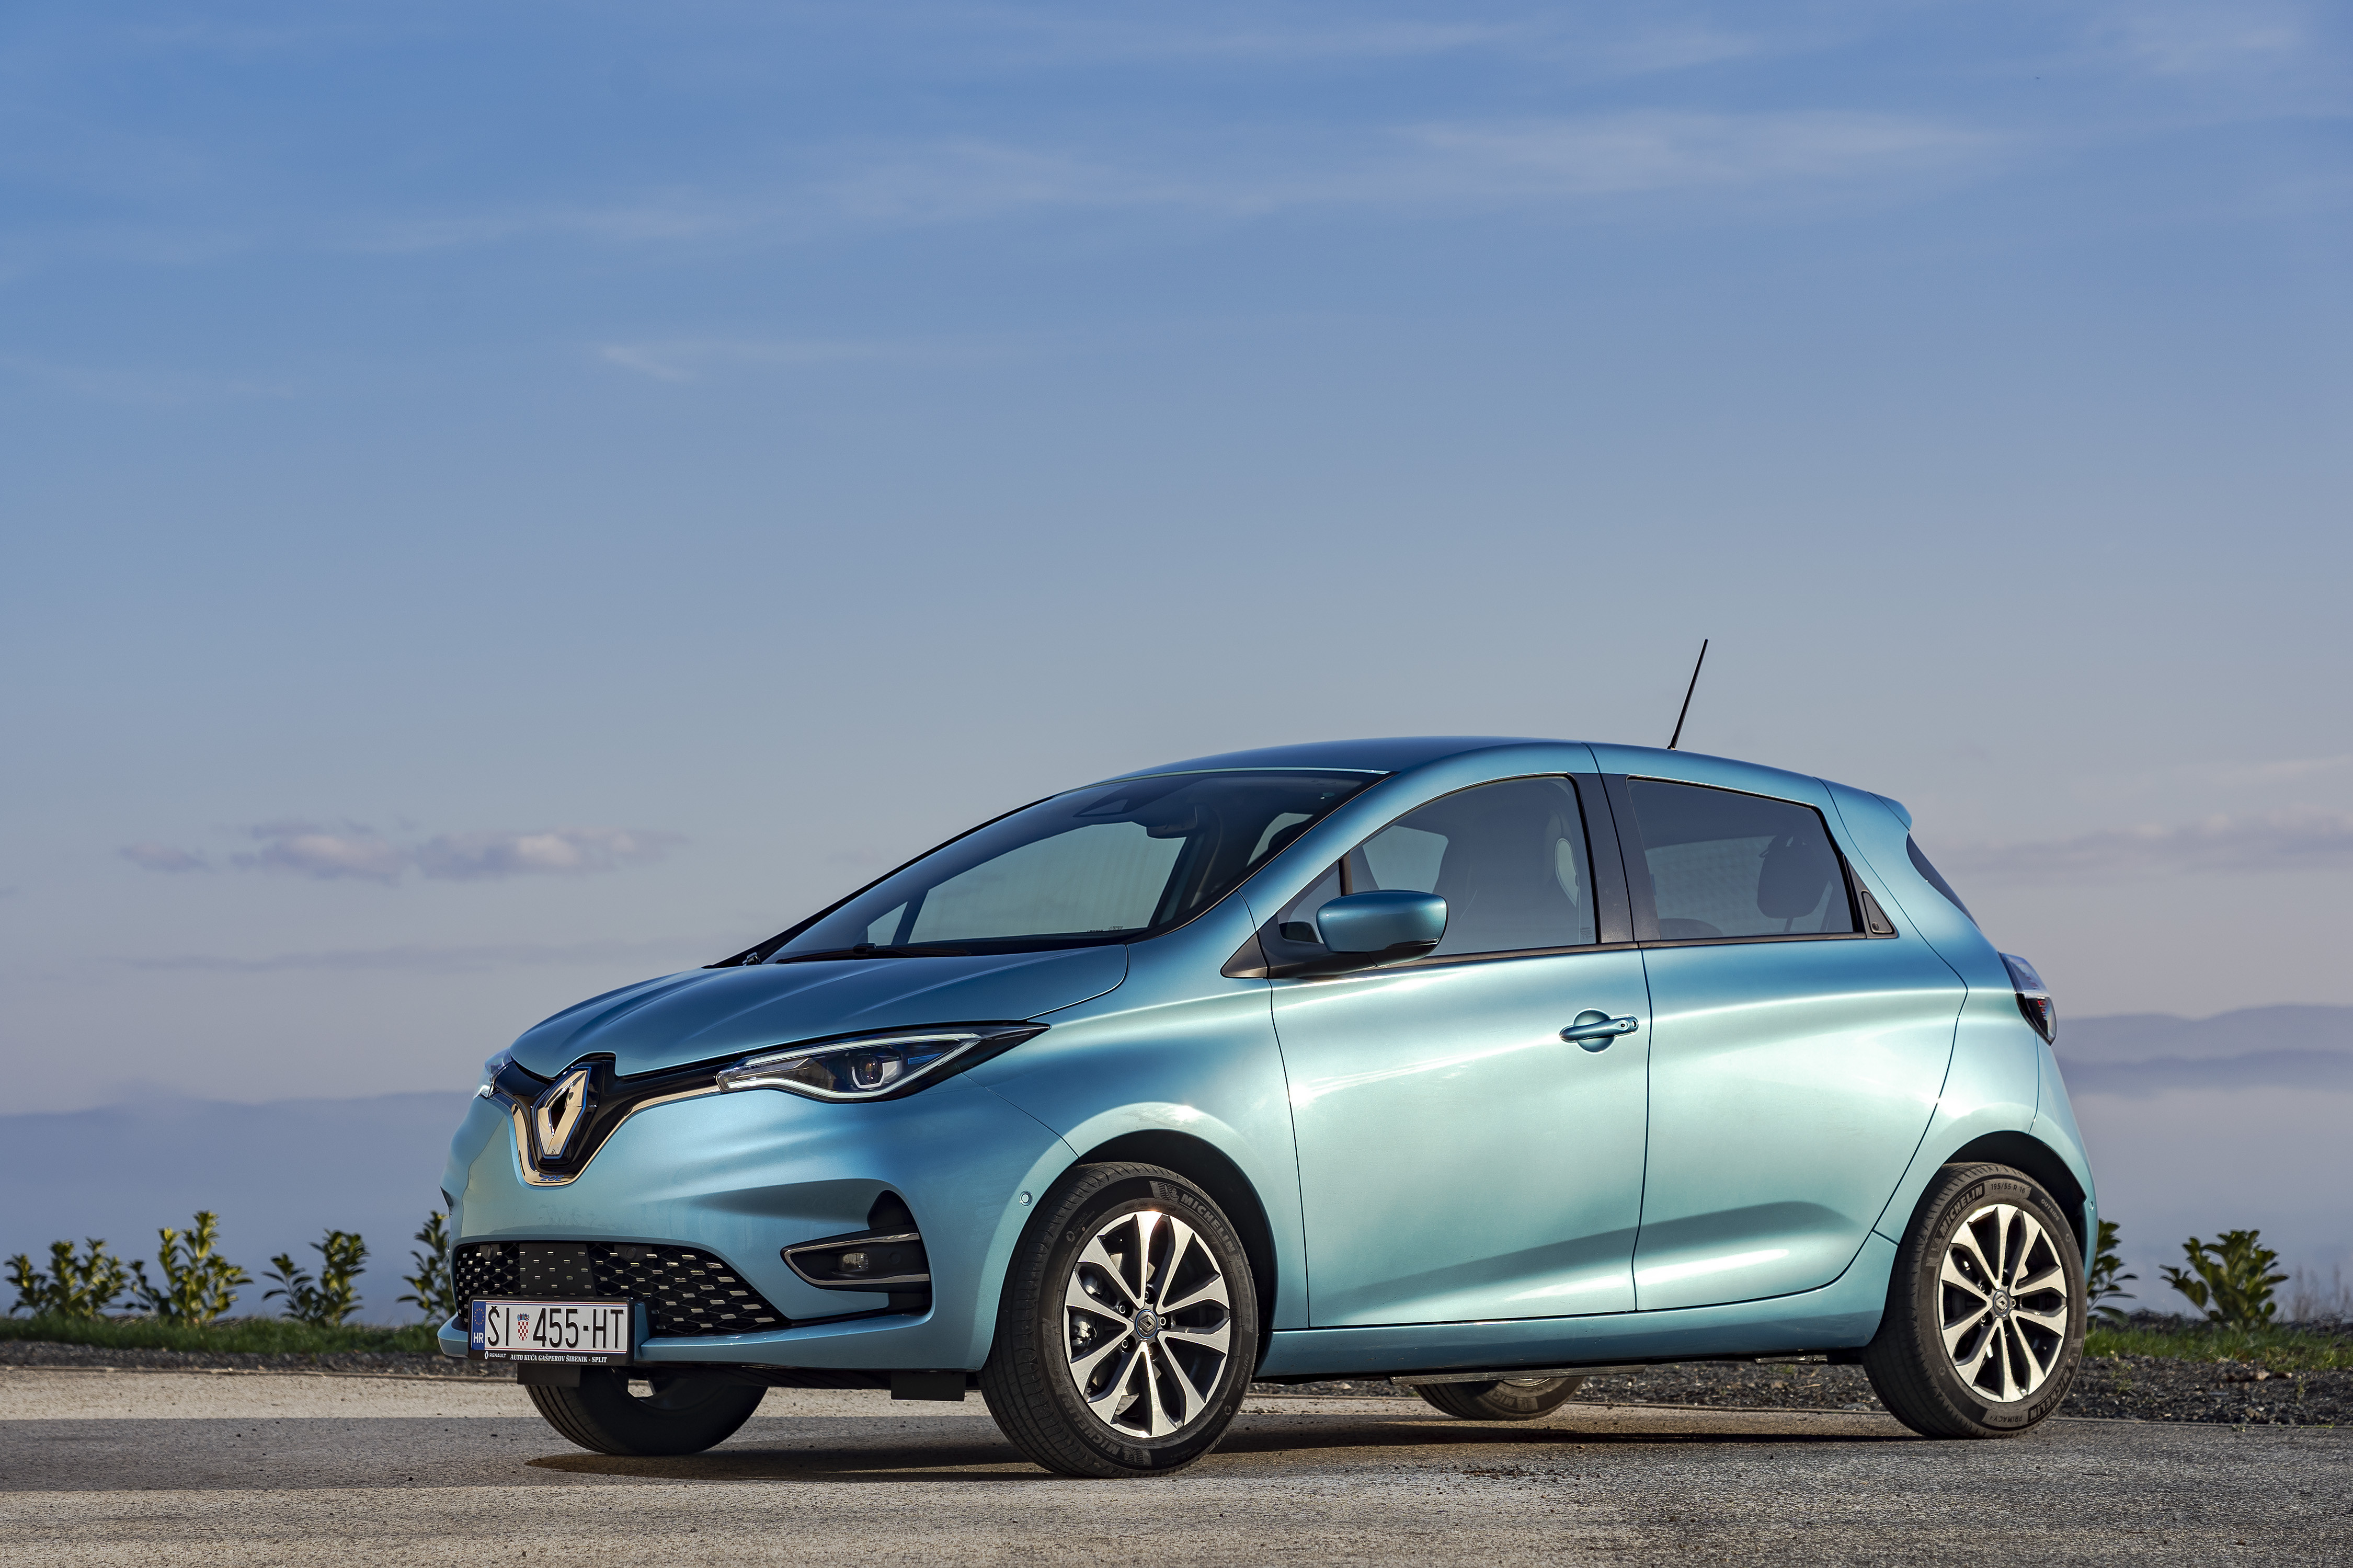 The Renault Zoe was also found to be a poor performer